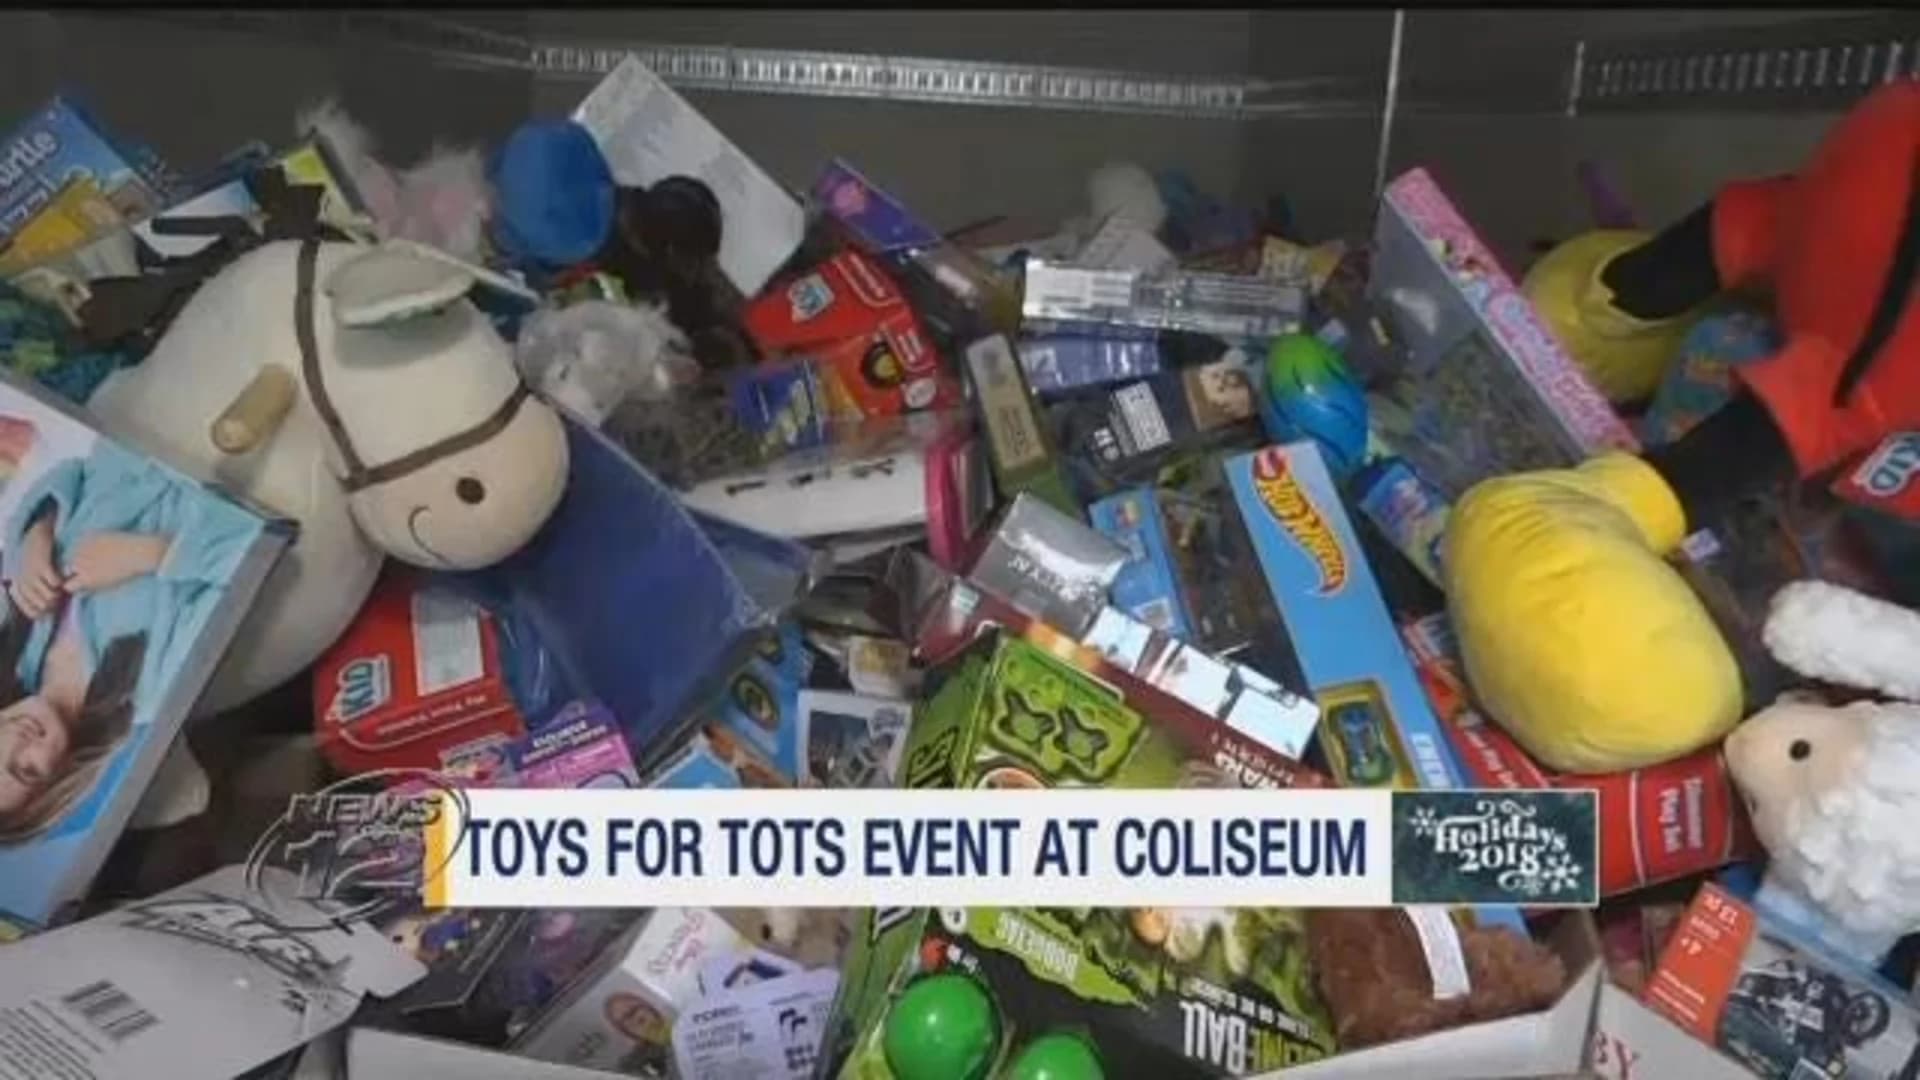 Making spirits bright: Truckloads of donated toys collected at Coliseum